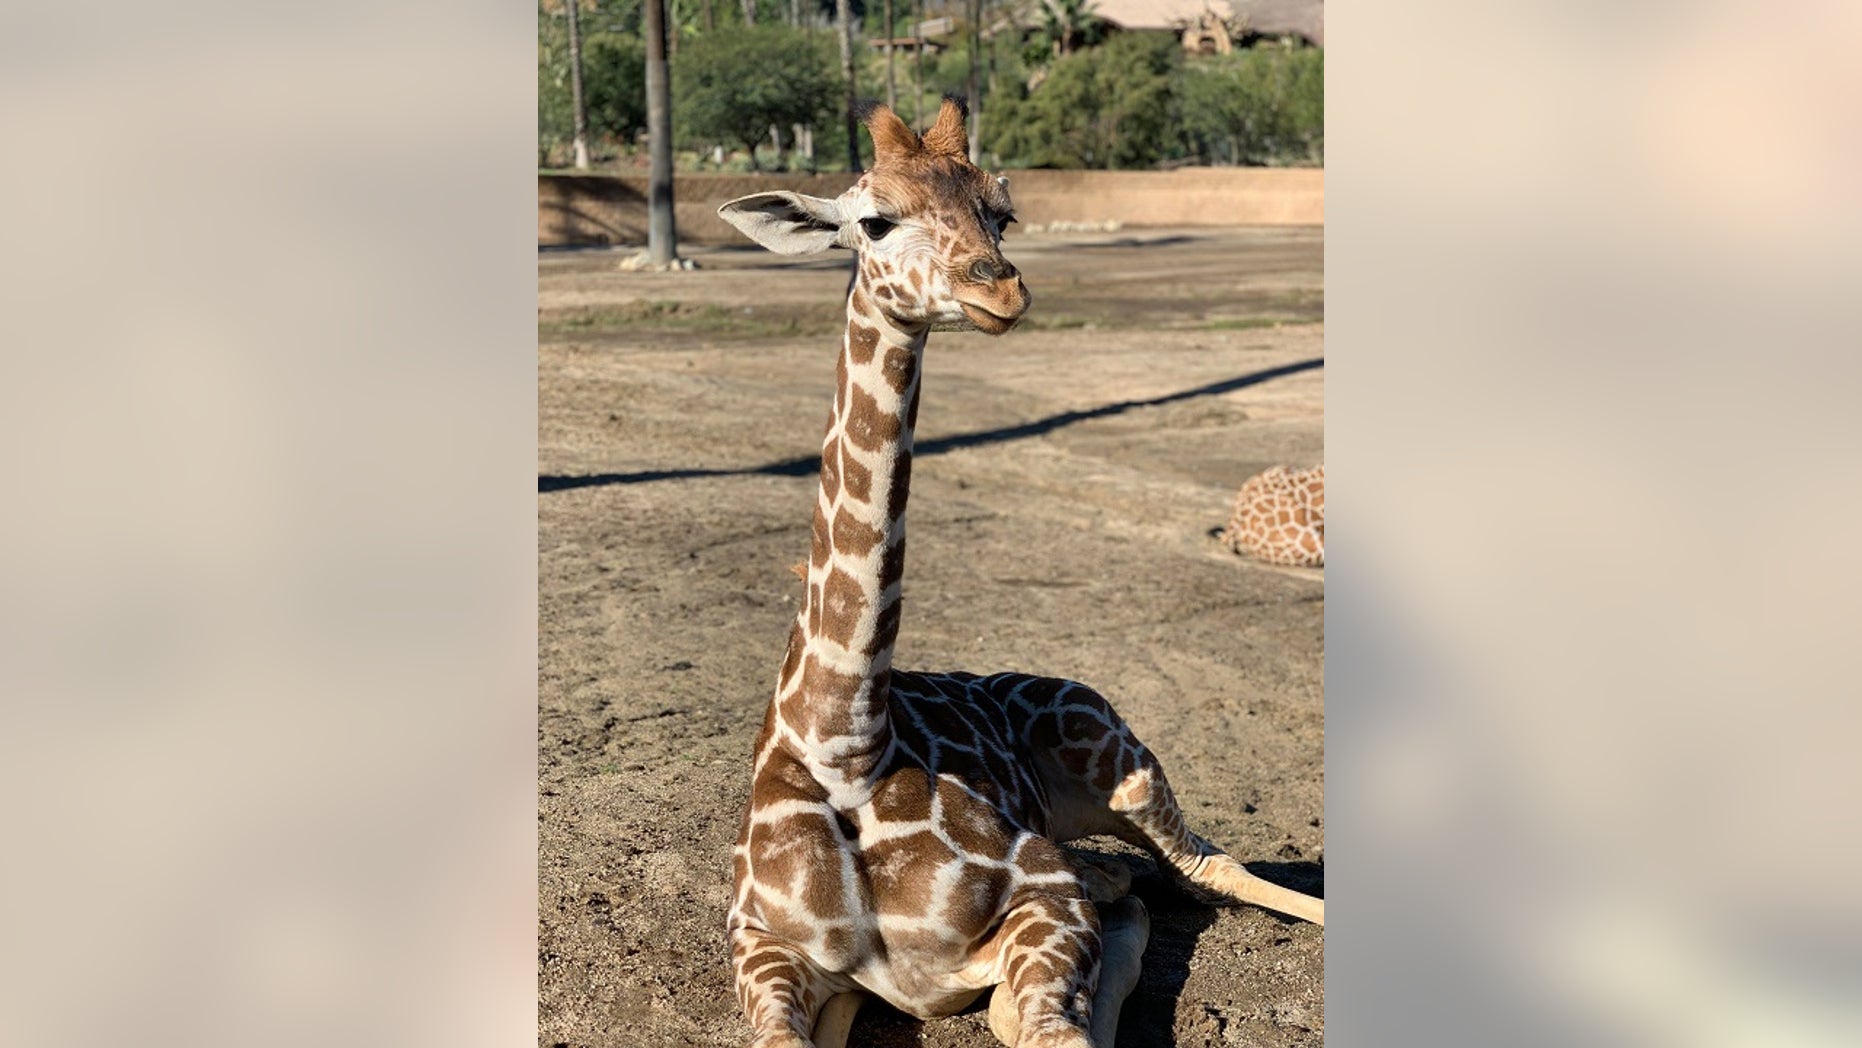 5-month-old giraffe euthanized after gore wound to stomach at San Diego Zoo